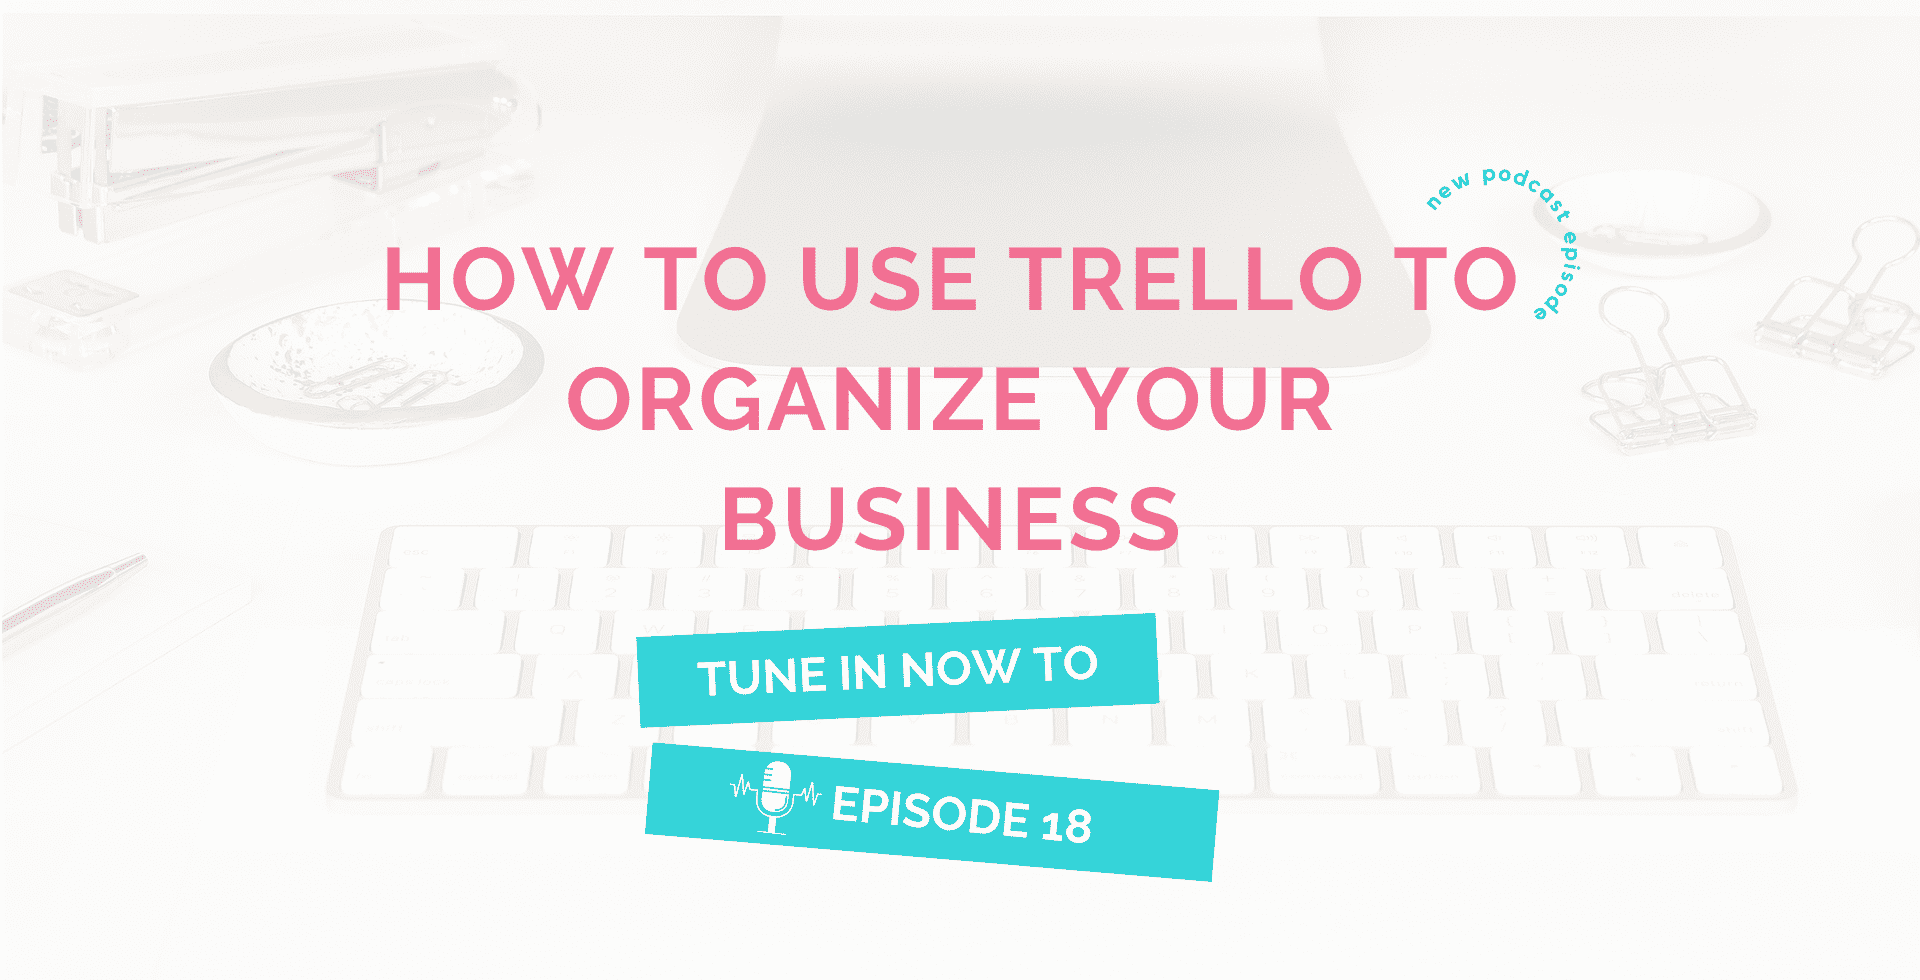 How to Use Trello to Organize Your Business